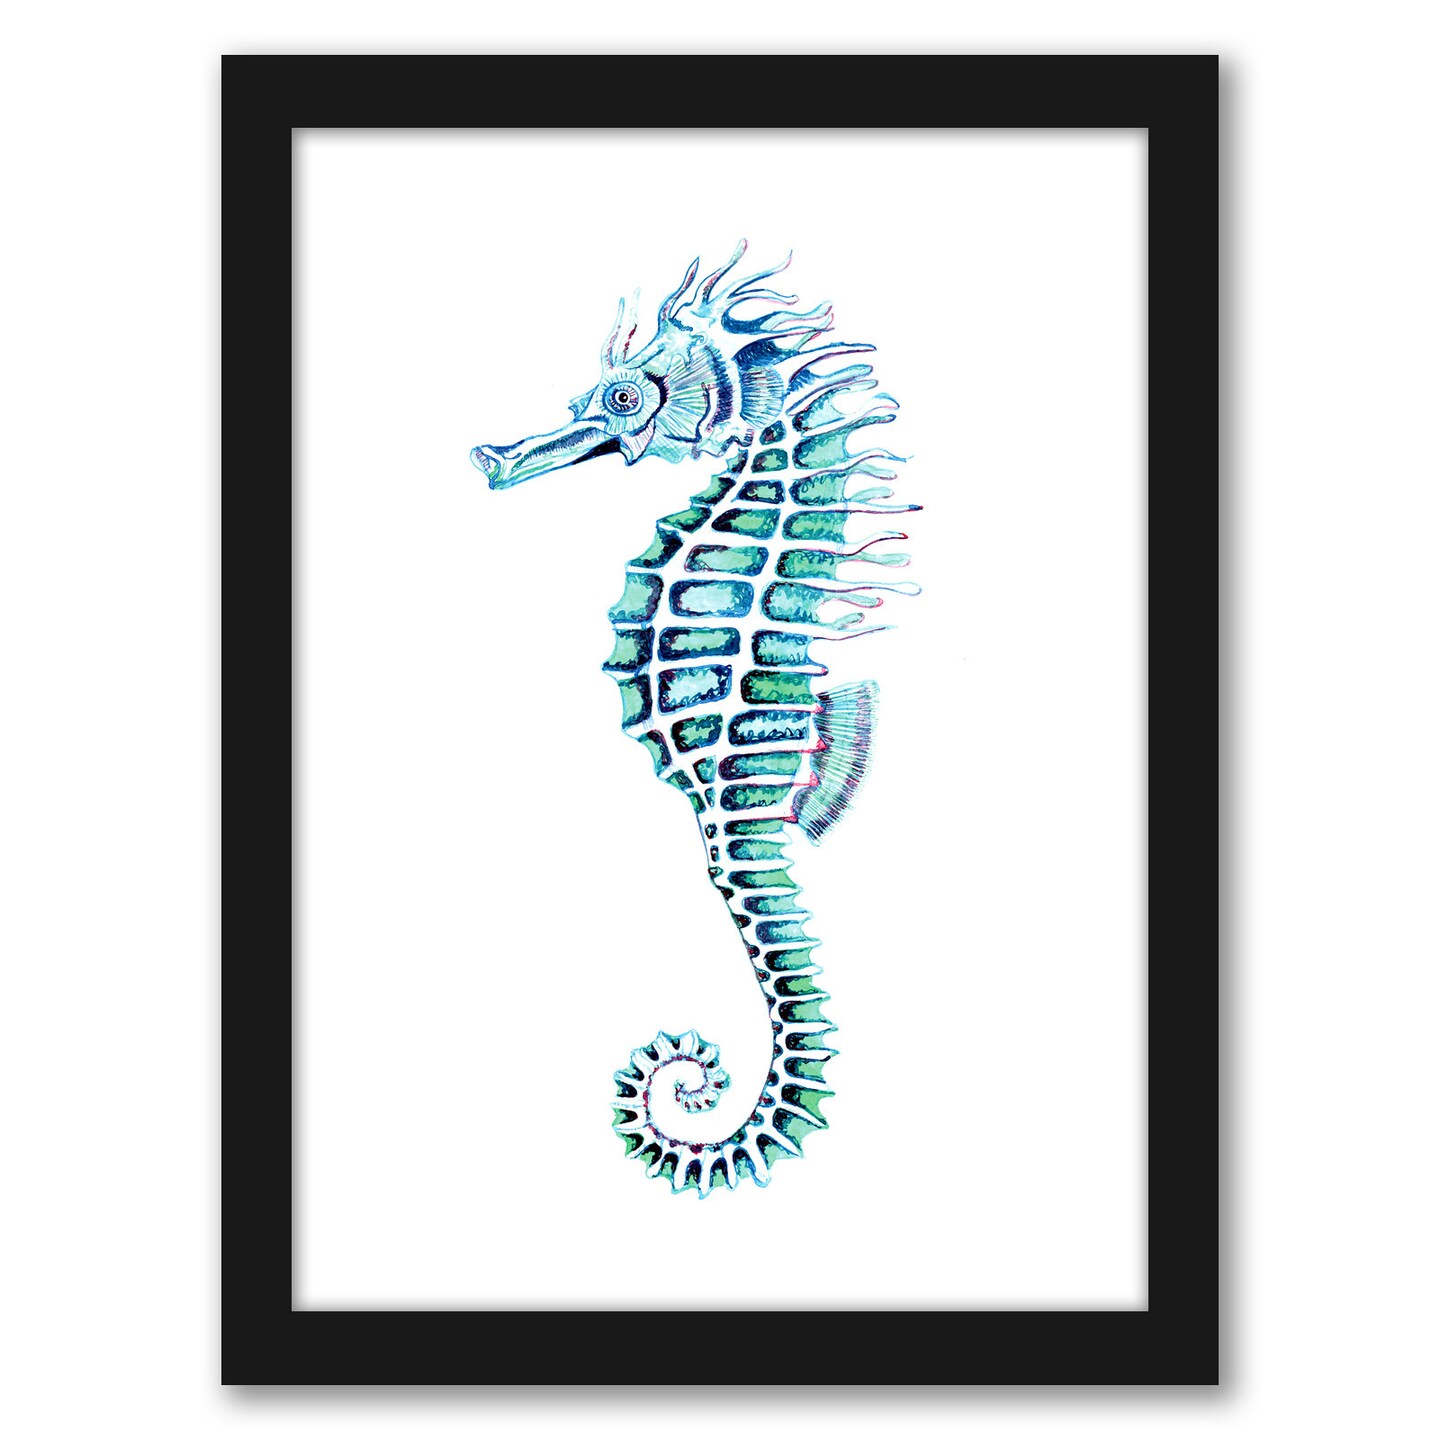 Crazy Seahorse 3 by T.J. Heiser Frame  - Americanflat